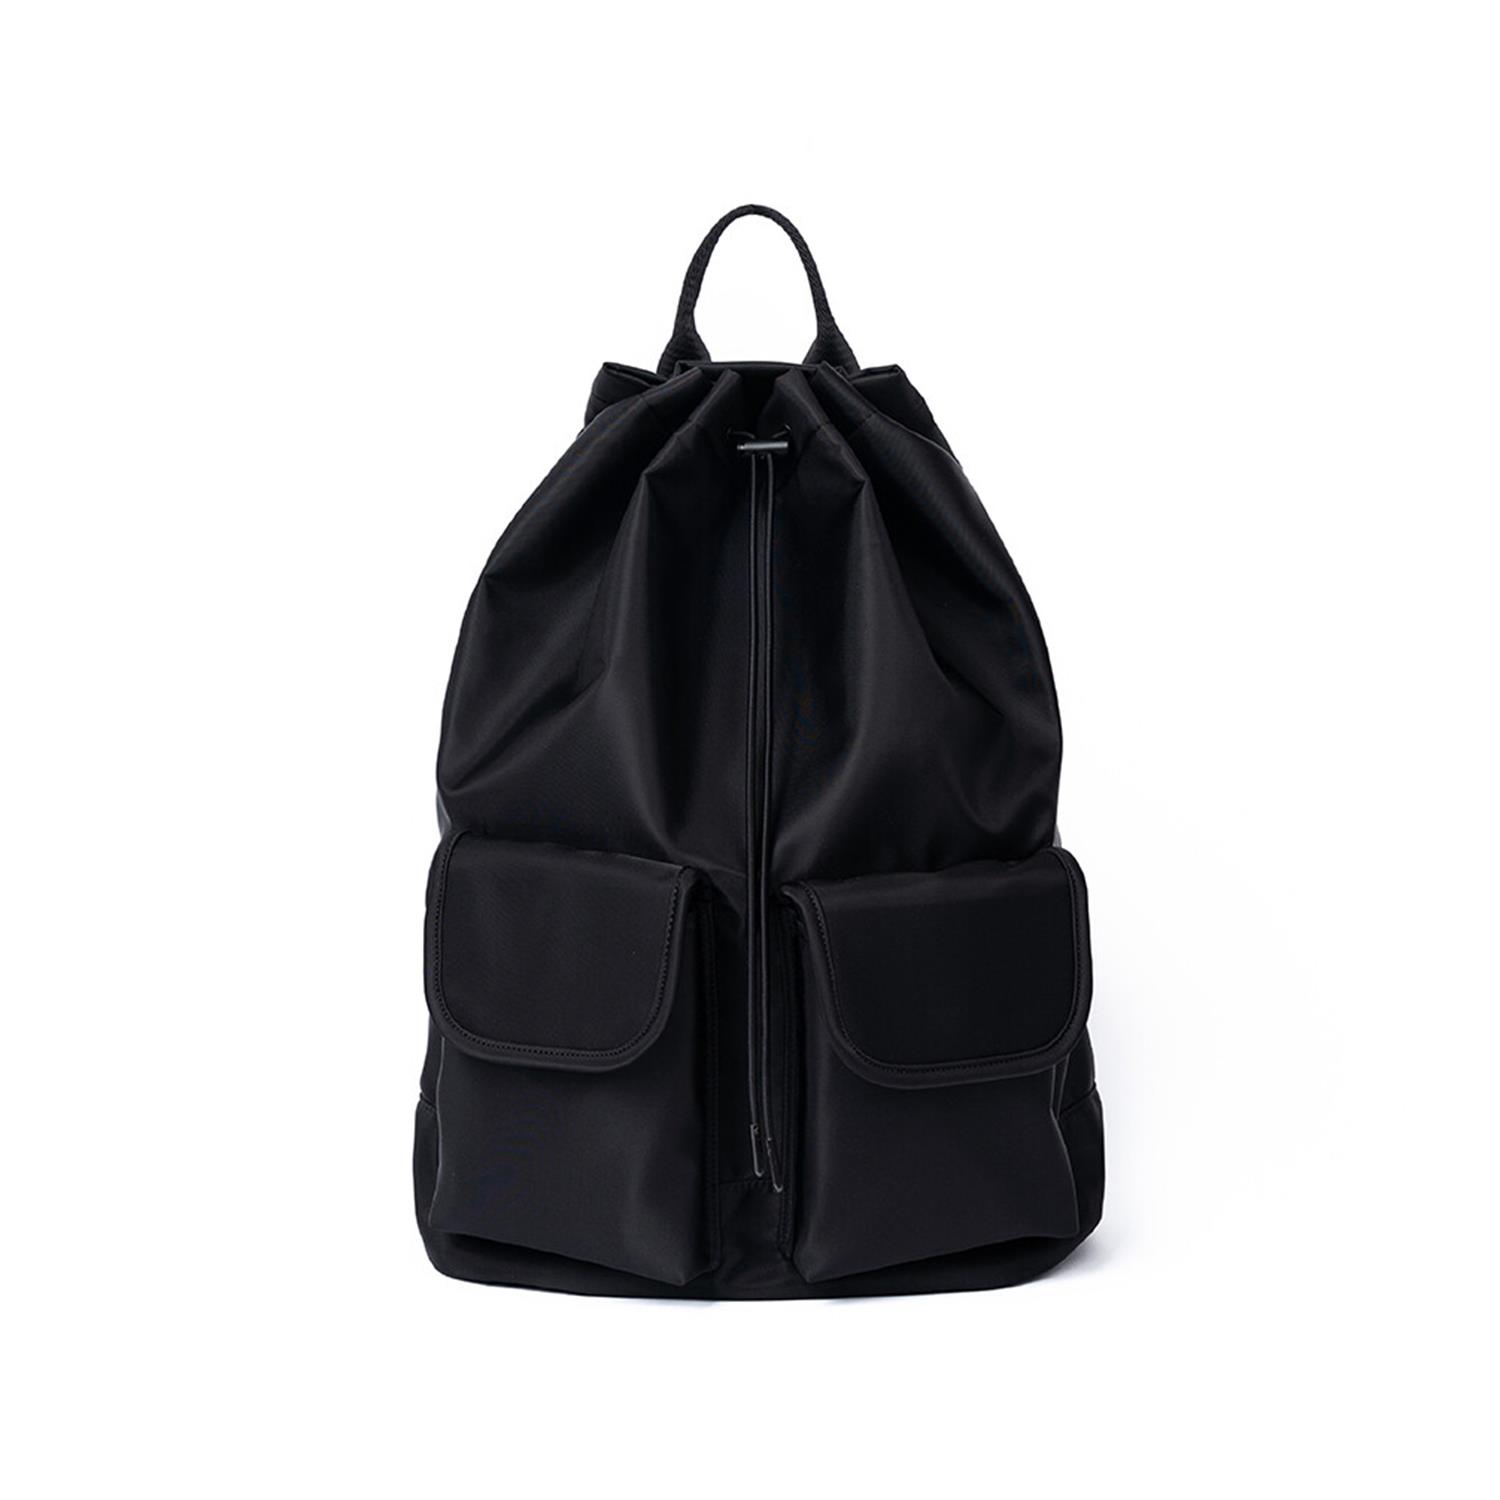 Women’s Pre-Order: Shipping After 28/2 Three-Way Two-Pocket Drawstring Bag - Black One Size Hah Archive